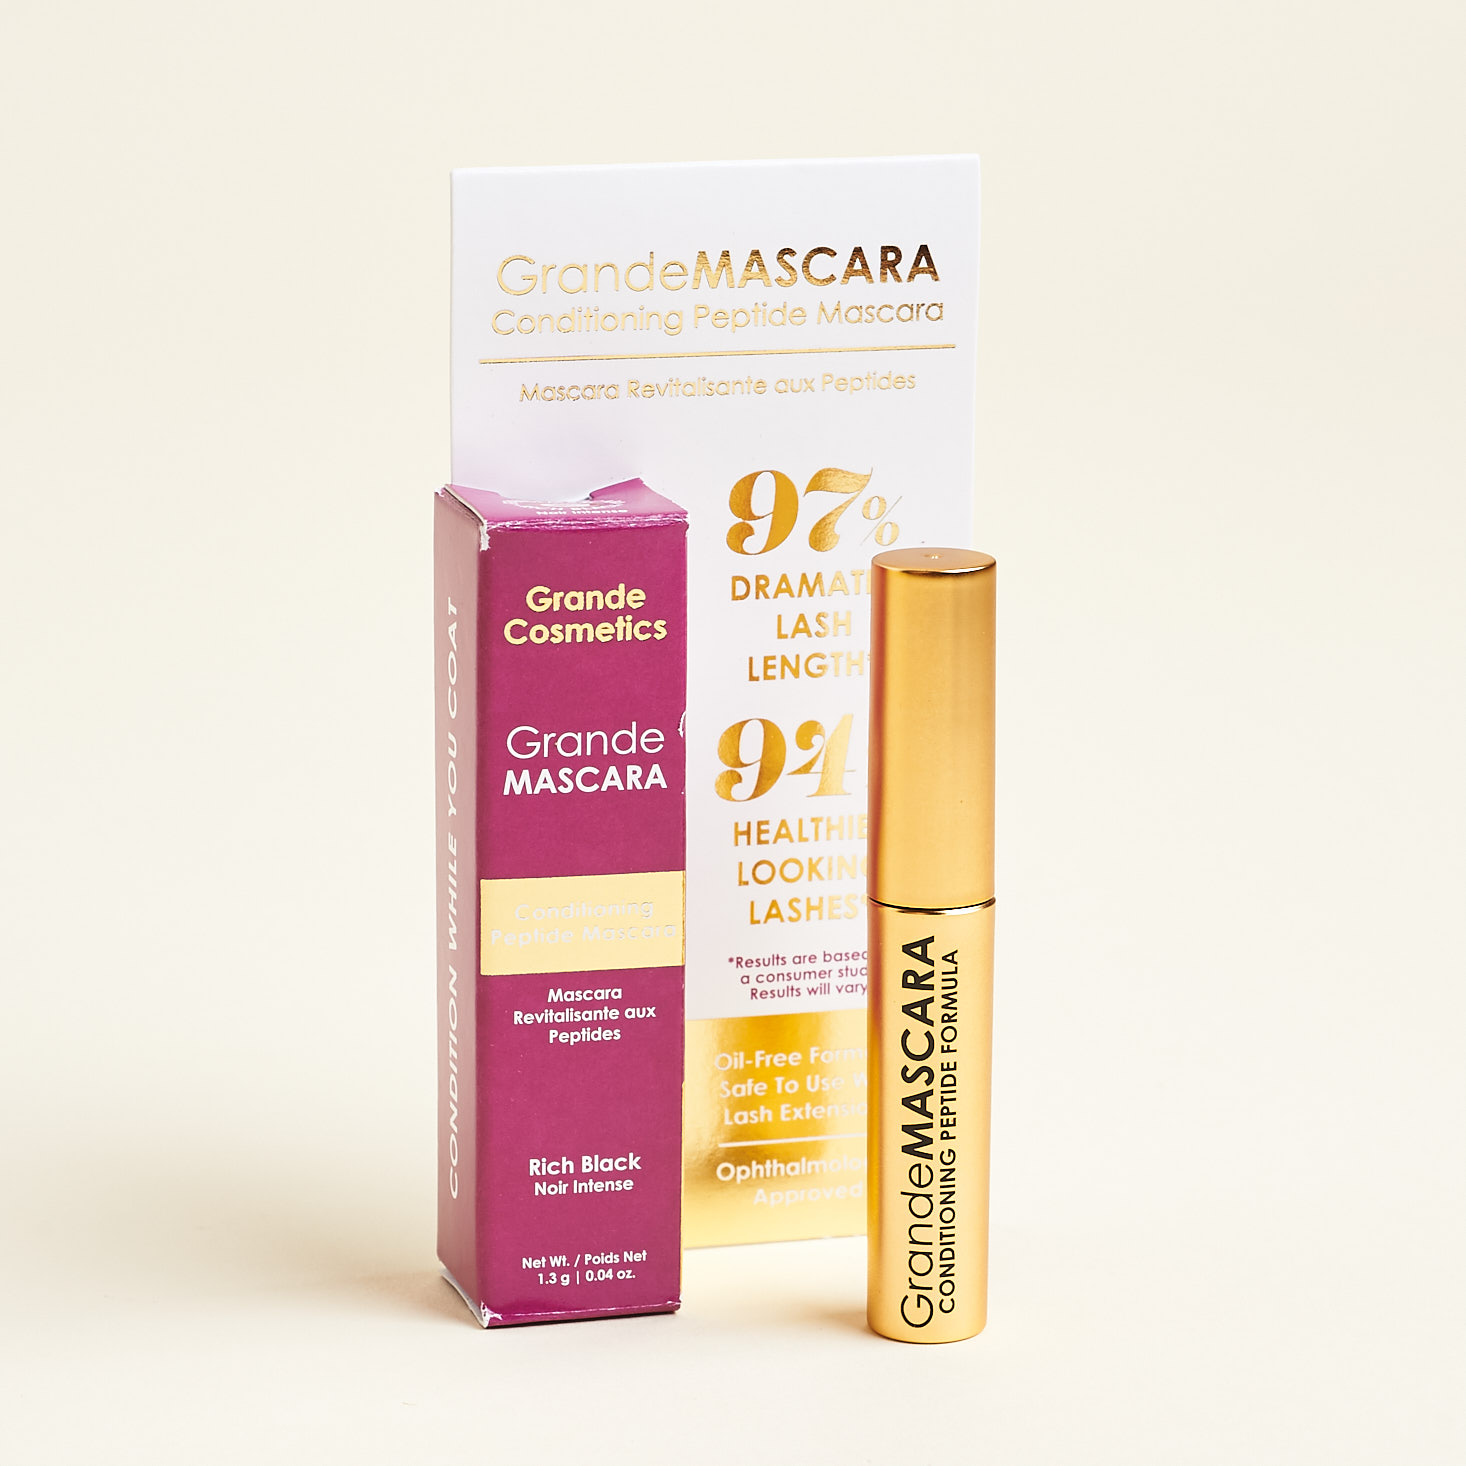 grande mascara in gold tube next to packaging